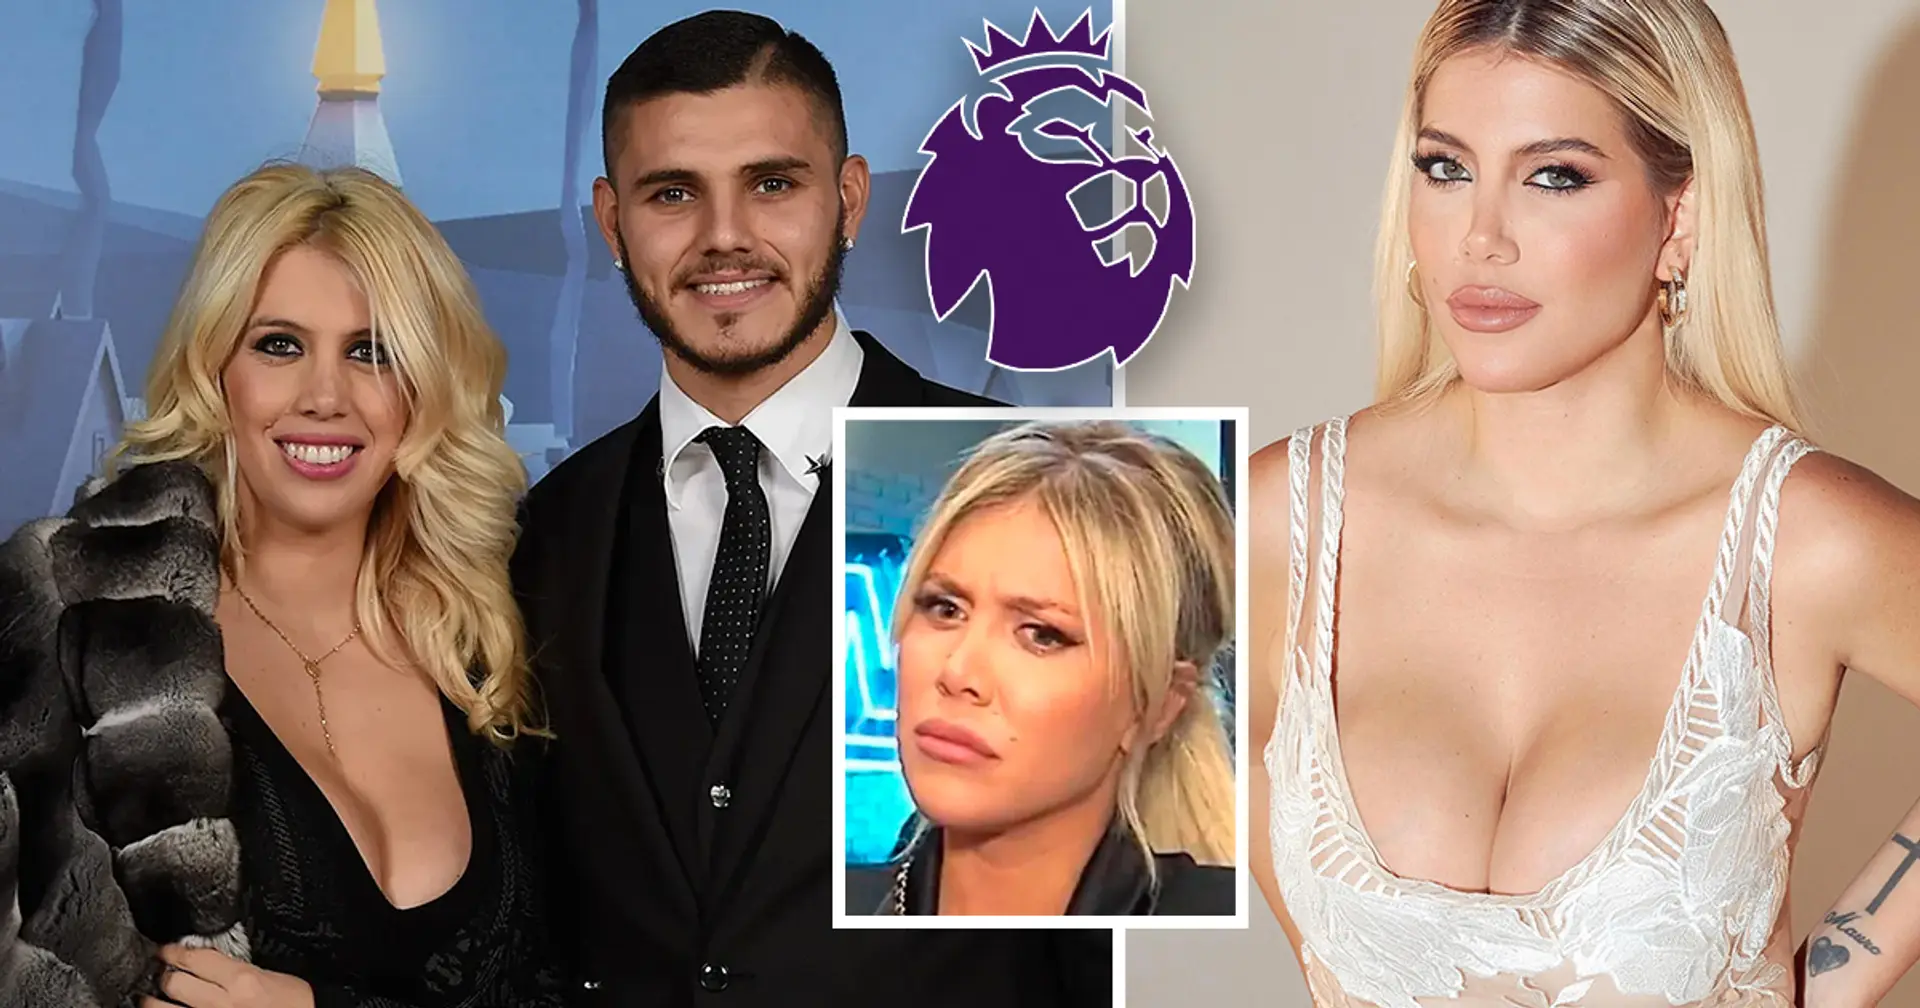 Wanda Nara claims Mauro Icardi's former teammate flirted with her while she was married, reveals his name